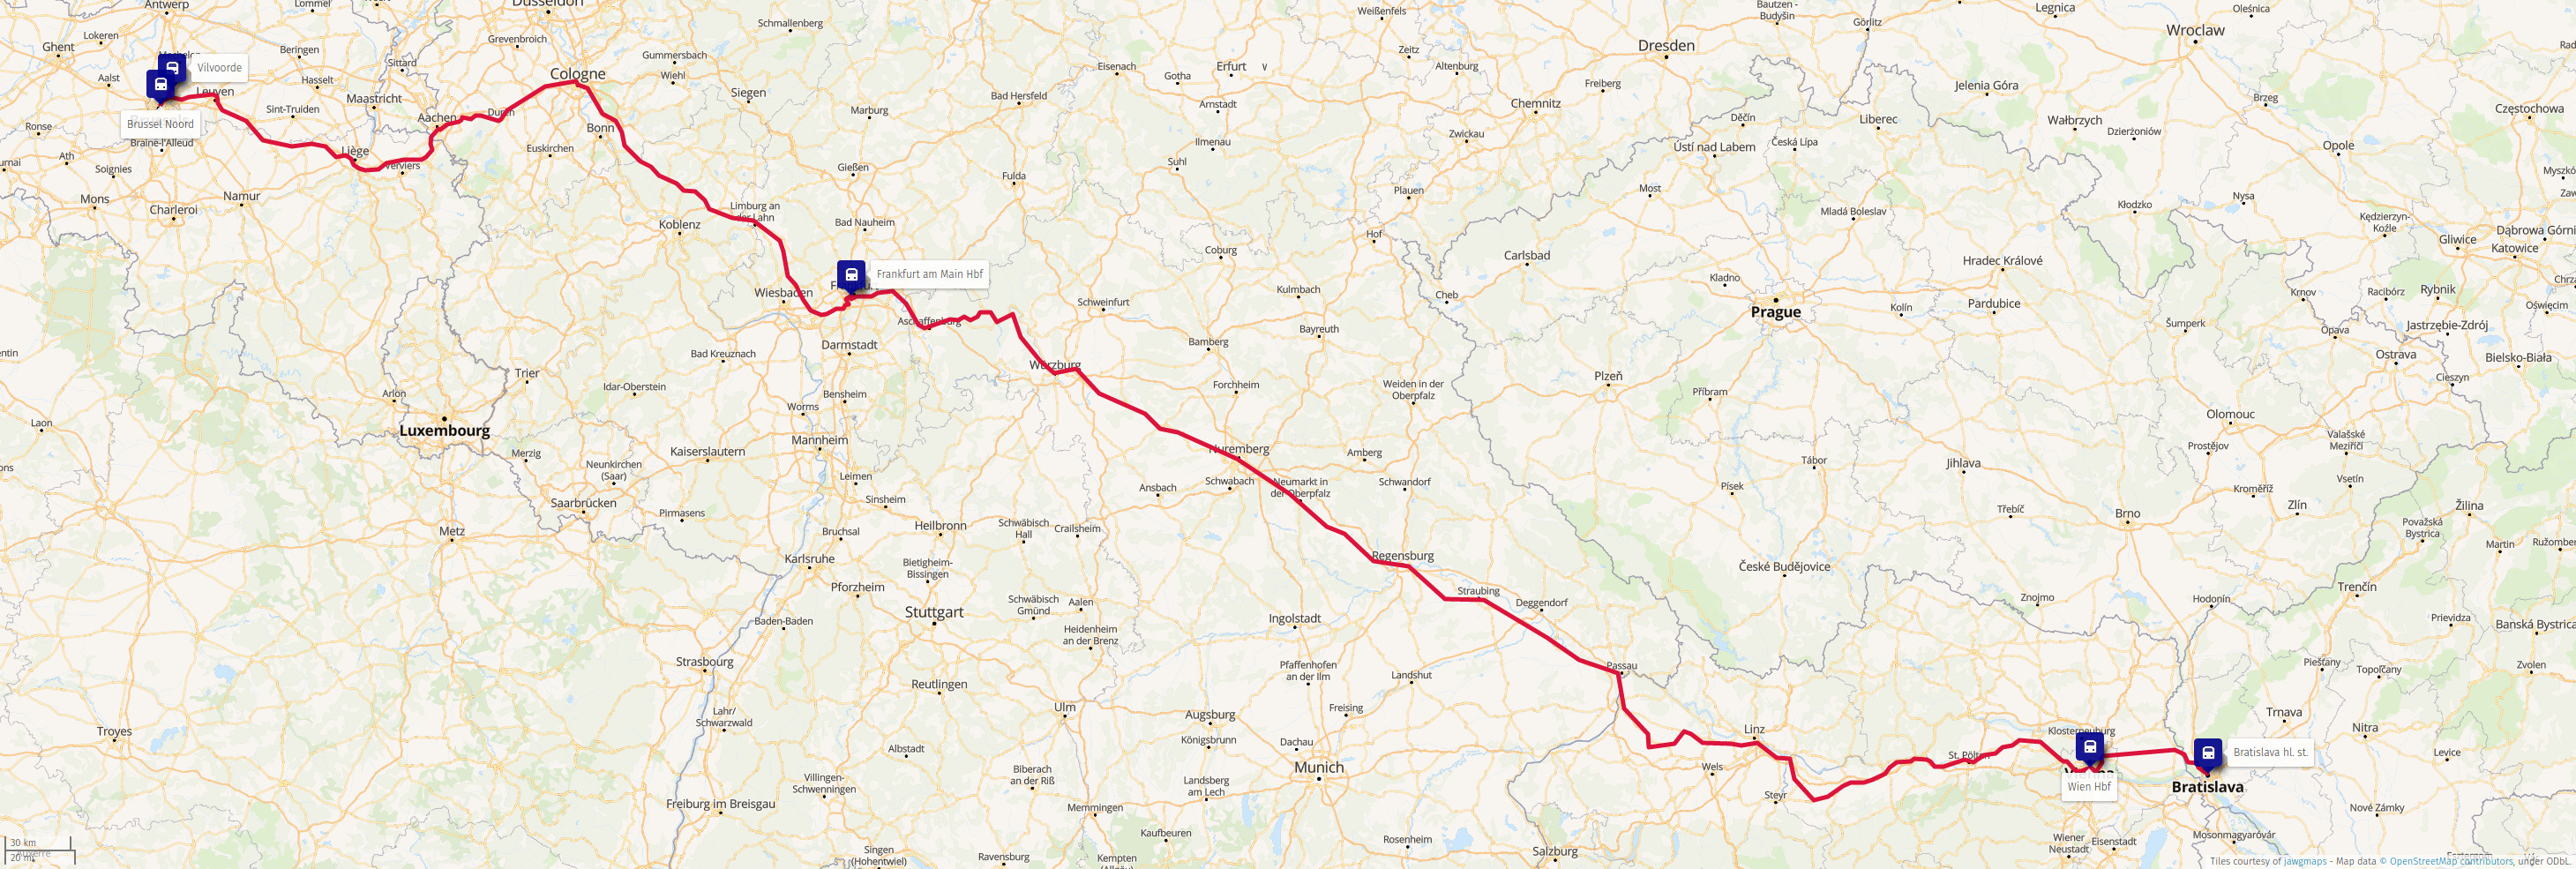 Train route from Bratislava to Vienna to Frankfurt to Brussels